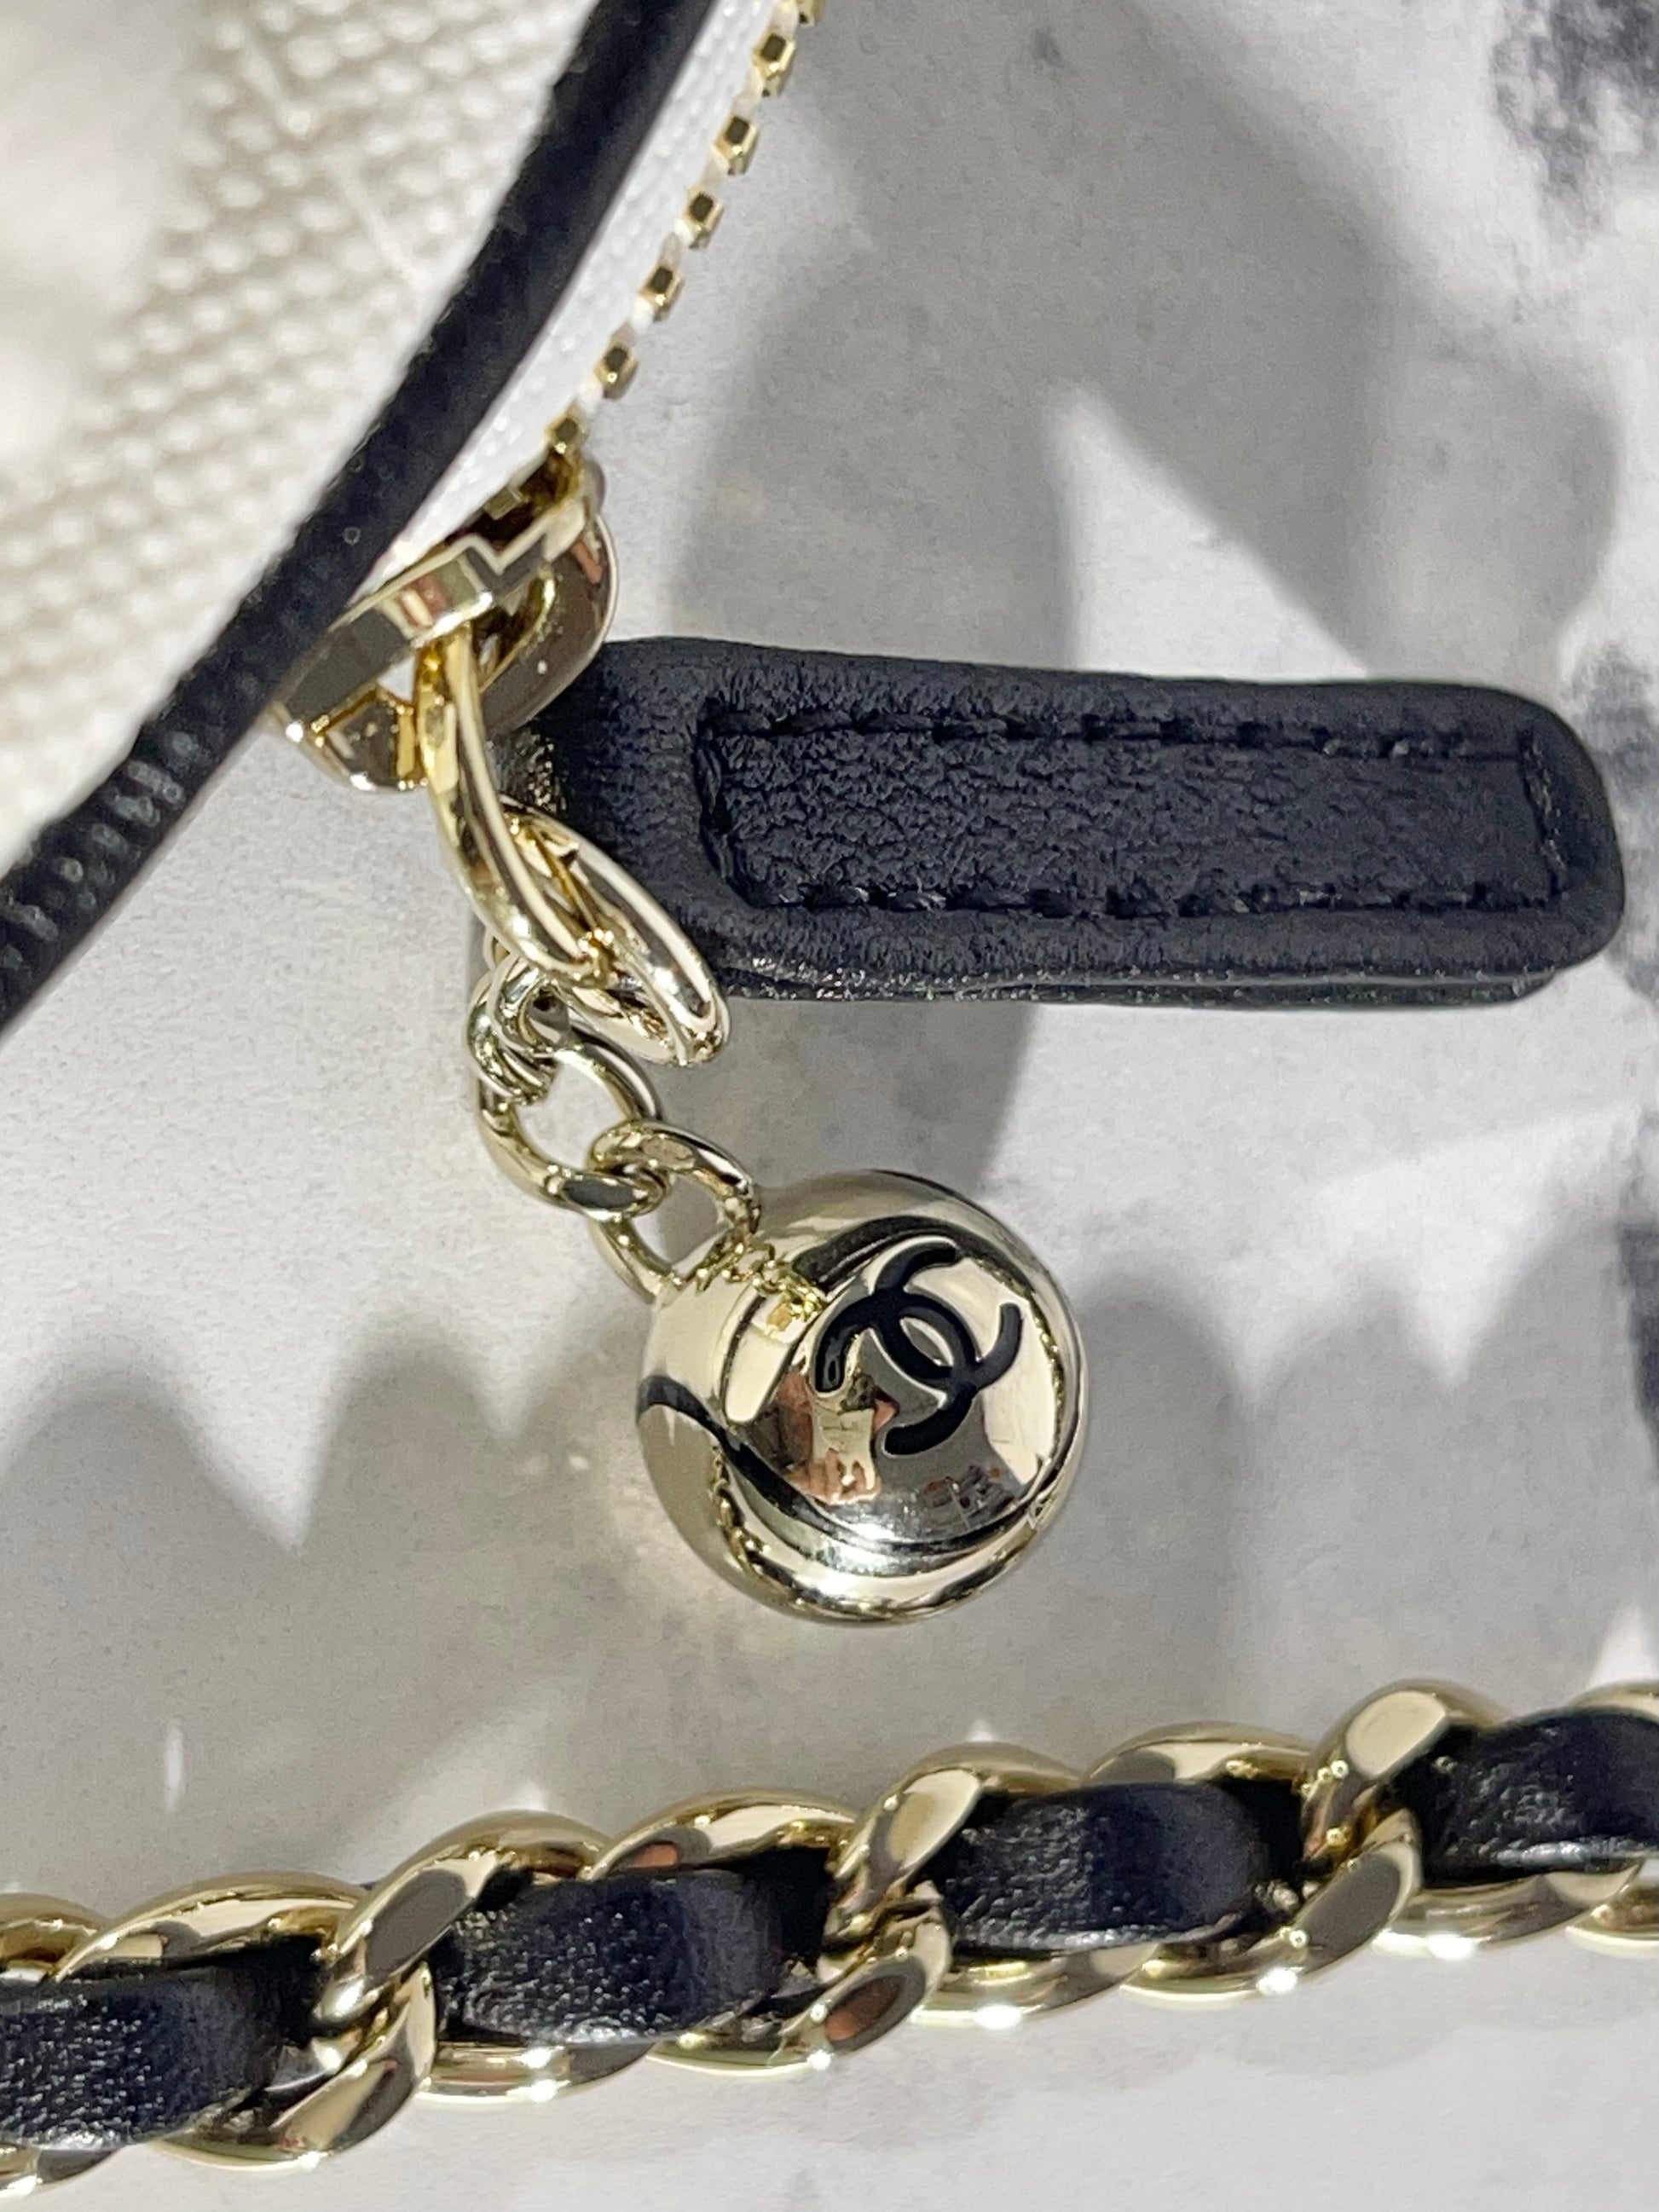 Chanel 23C Tennis Racket Mirror Vanity Clutch with Chain in White & Bl –  Old Trends New Trends